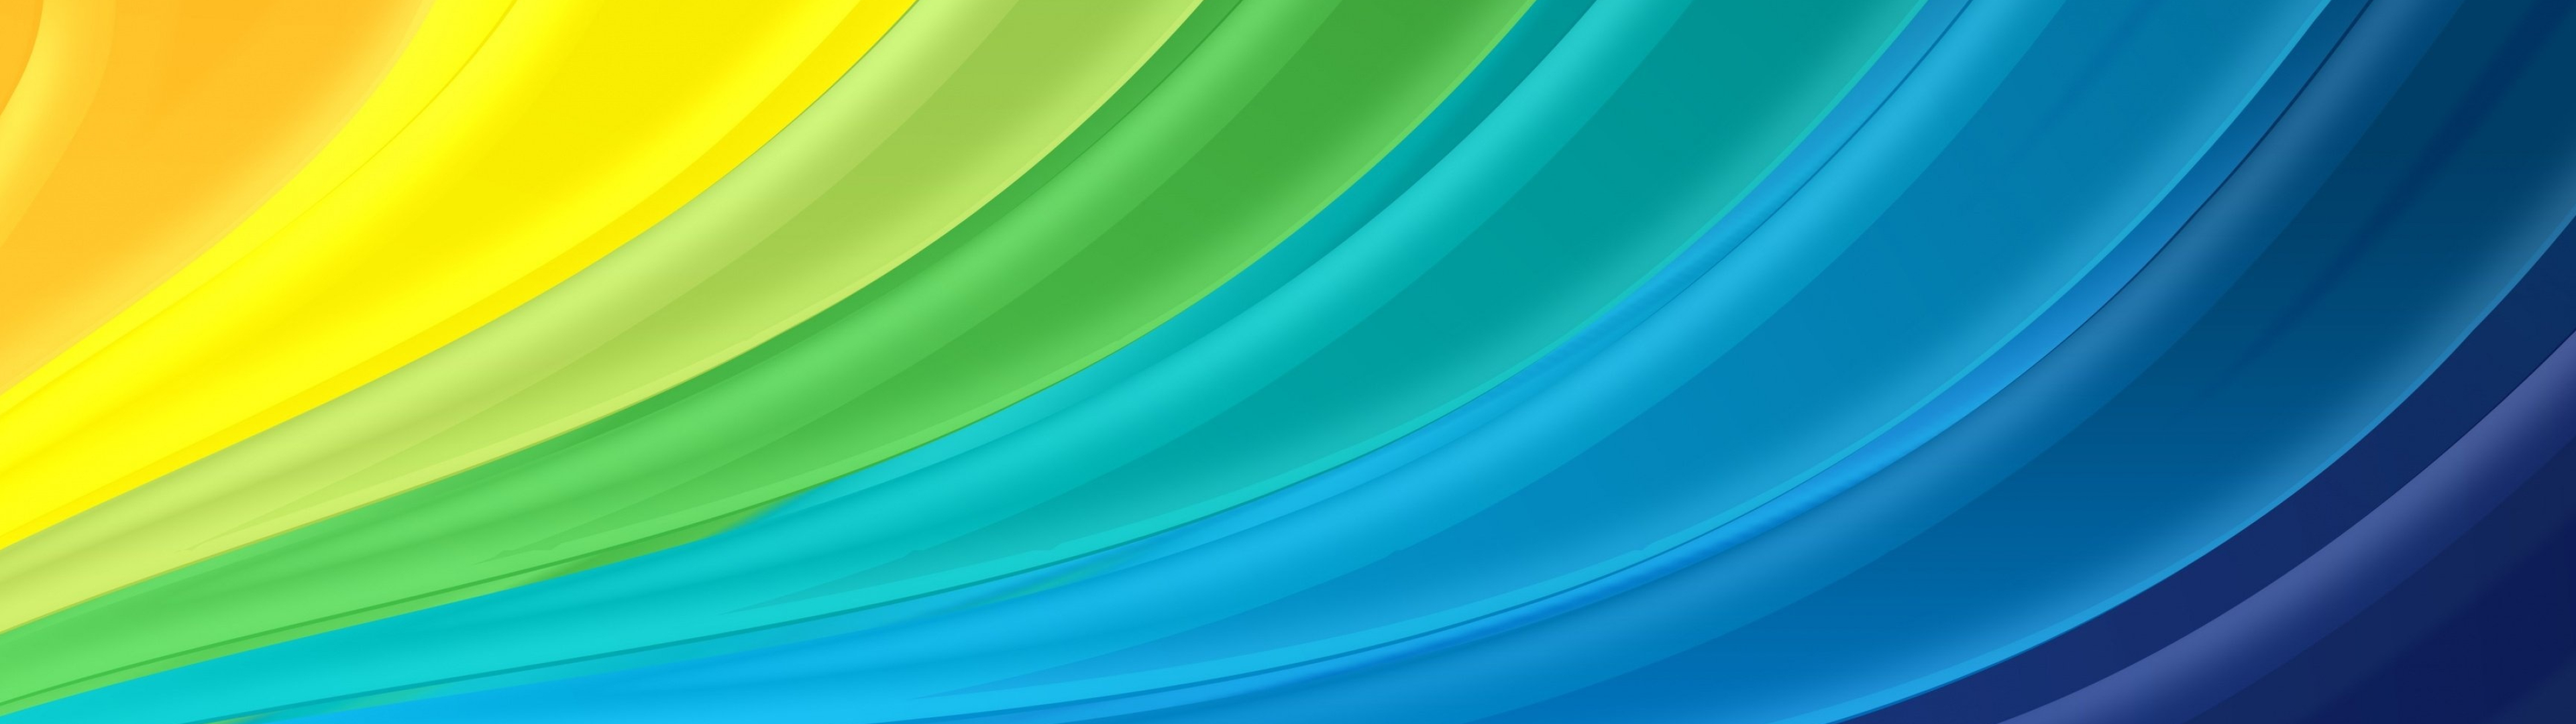 Abstract dual monitor wallpaper, Vibrant multi-display backgrounds, Colorful and artistic, Eye-catching designs, 3840x1080 Dual Screen Desktop